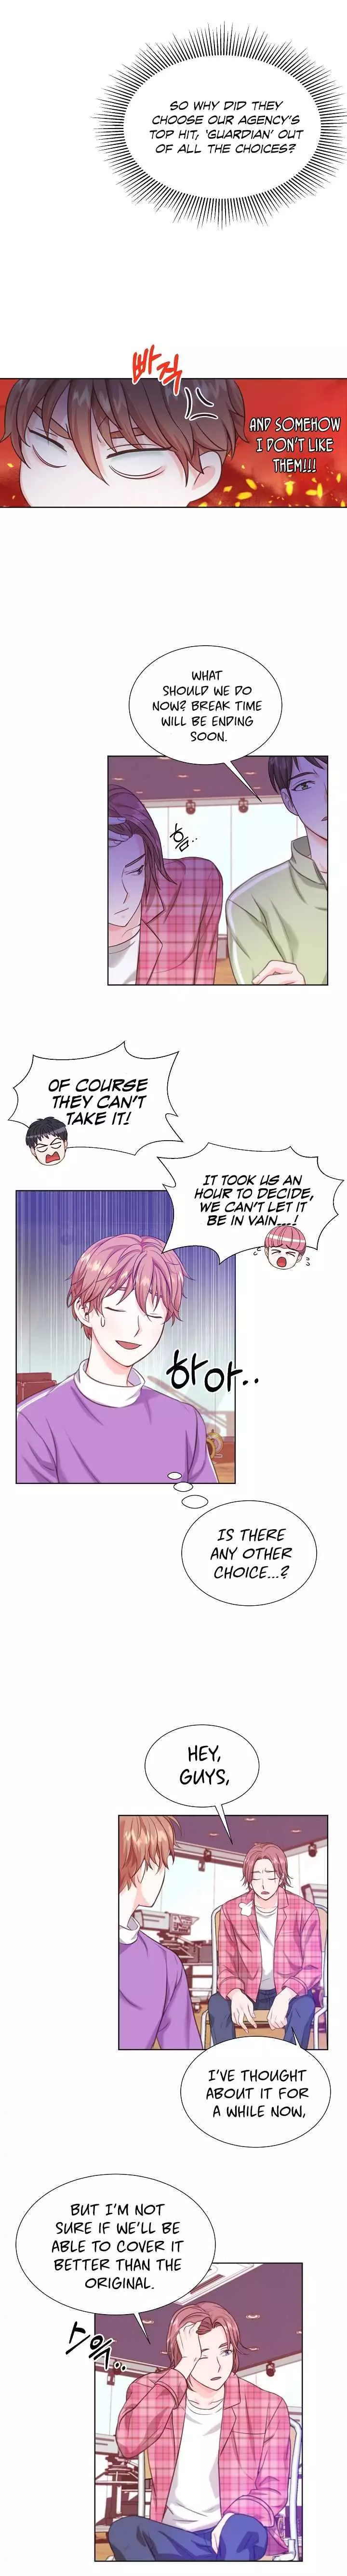 Once Again Idol - 11 page 10-6a961bd0